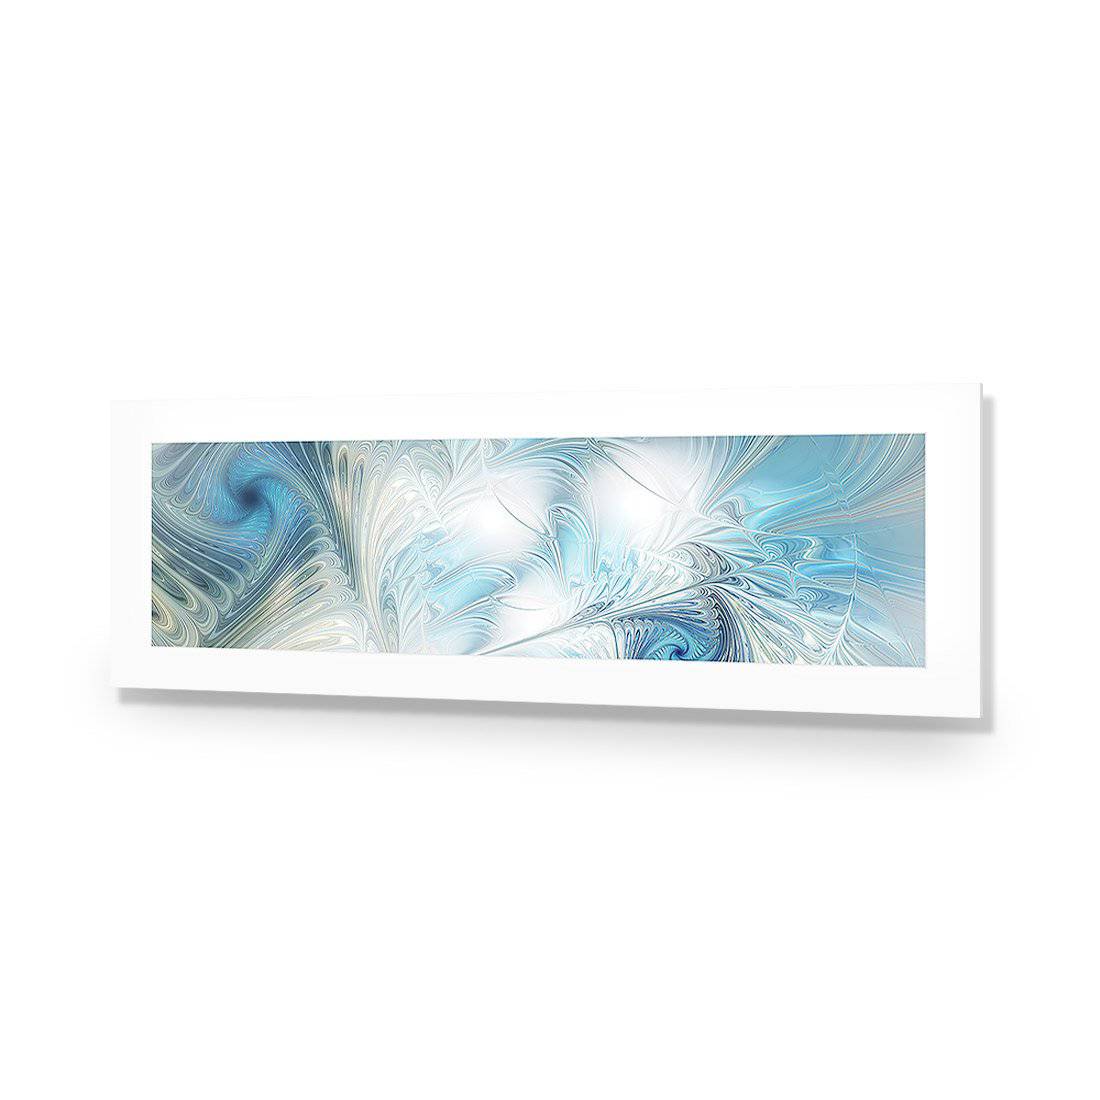 Travesty, Long-Acrylic-Wall Art Design-With Border-Acrylic - No Frame-60x20cm-Wall Art Designs